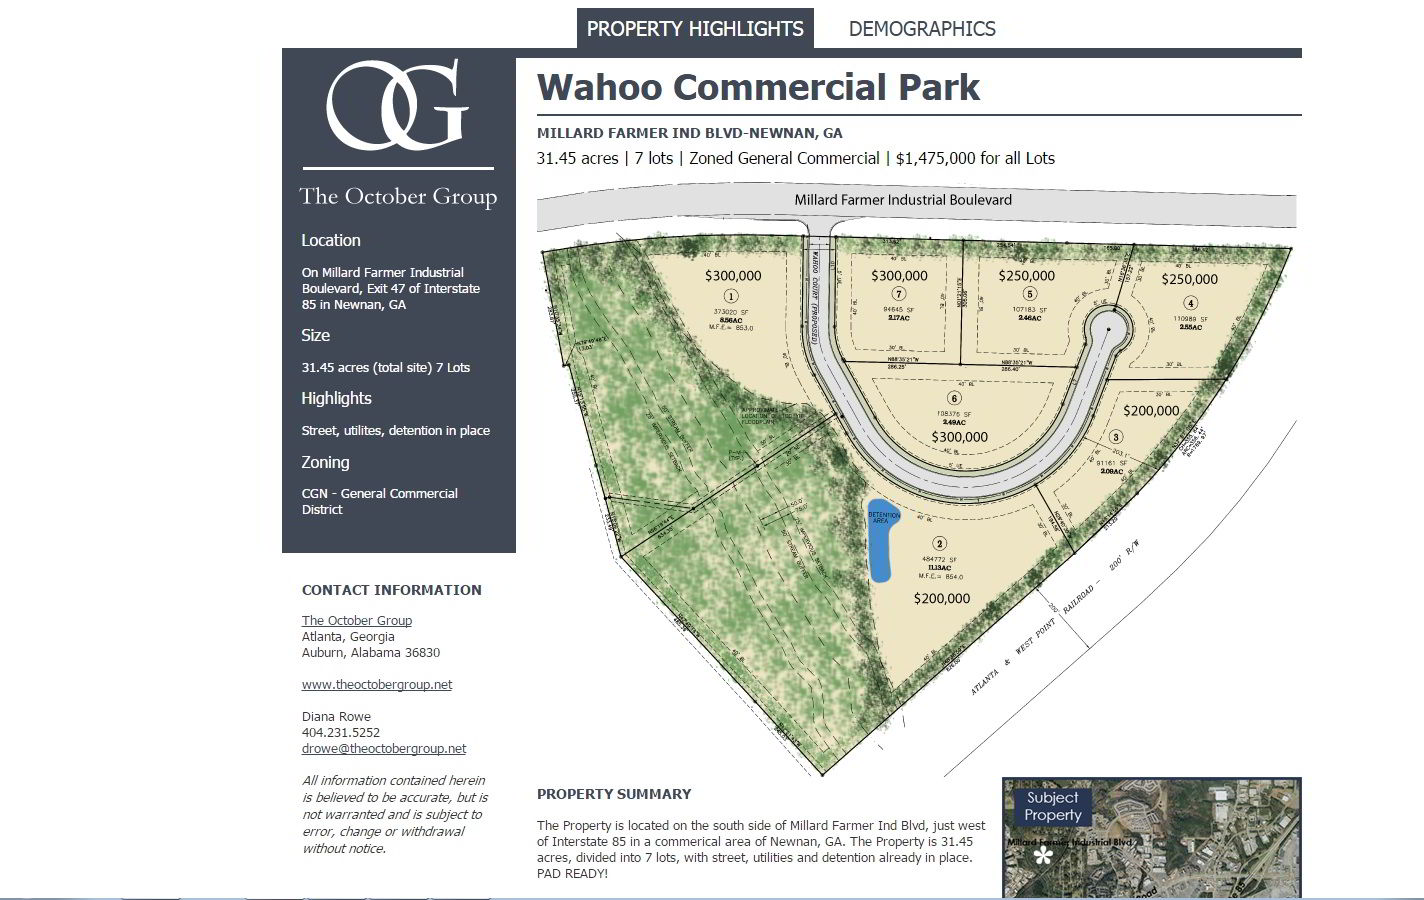 Wahoo Commercial Park is a property for sale by The October Group in Newnan, Georgia. The realty company wanted to heavily market this large property so they called us to give it a web site! Simple and informative is what makes this web site special.